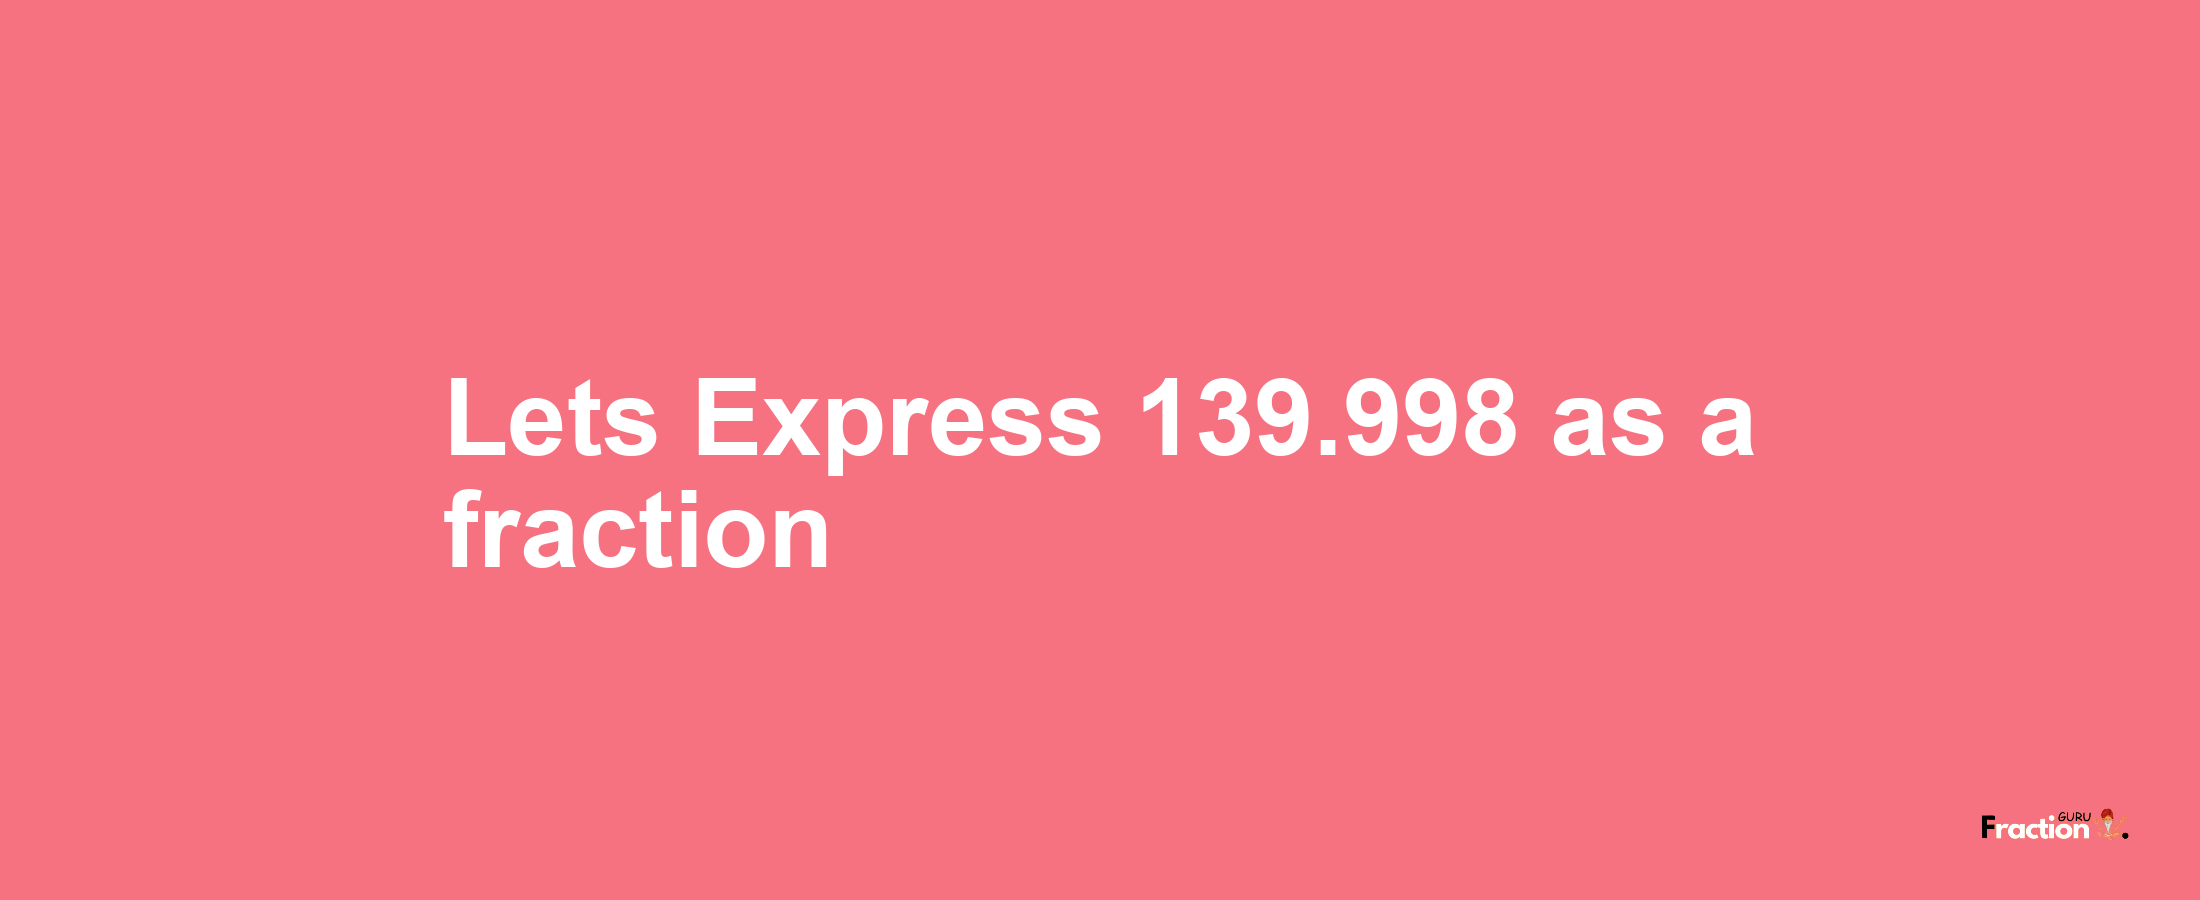 Lets Express 139.998 as afraction